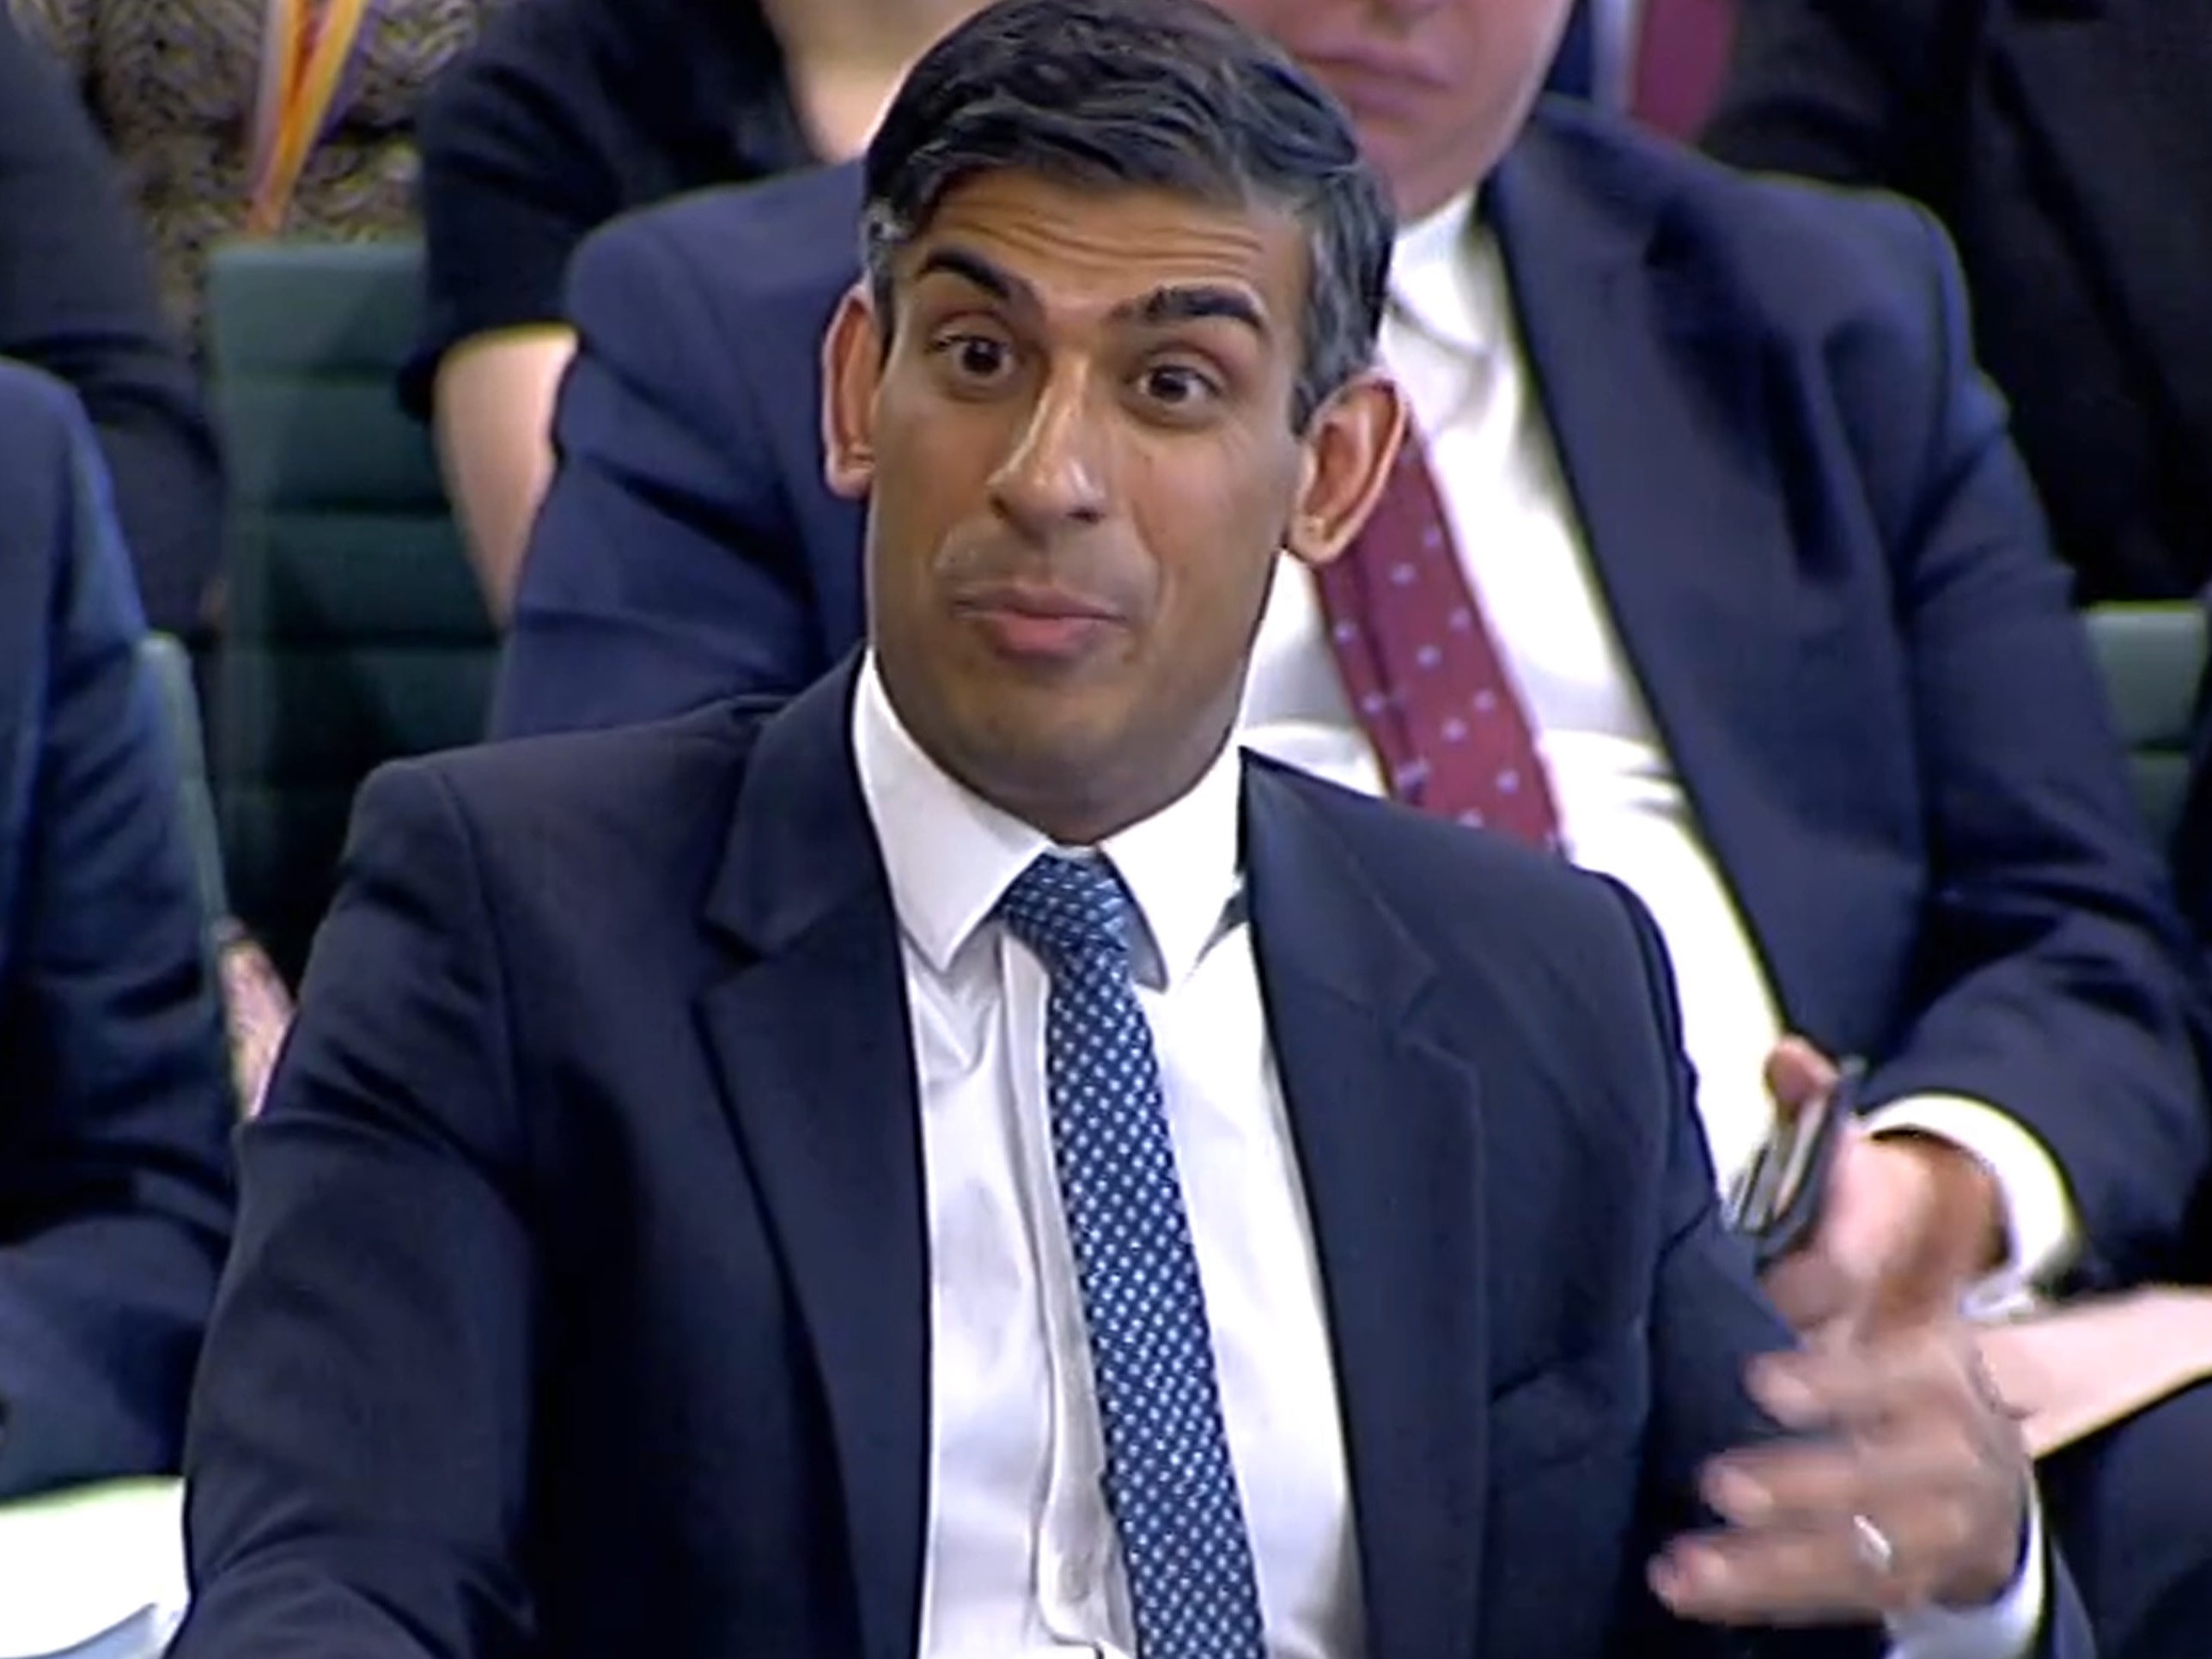 Rishi Sunak faced flak over reports that UK was planning to abandon its climate finance pledge